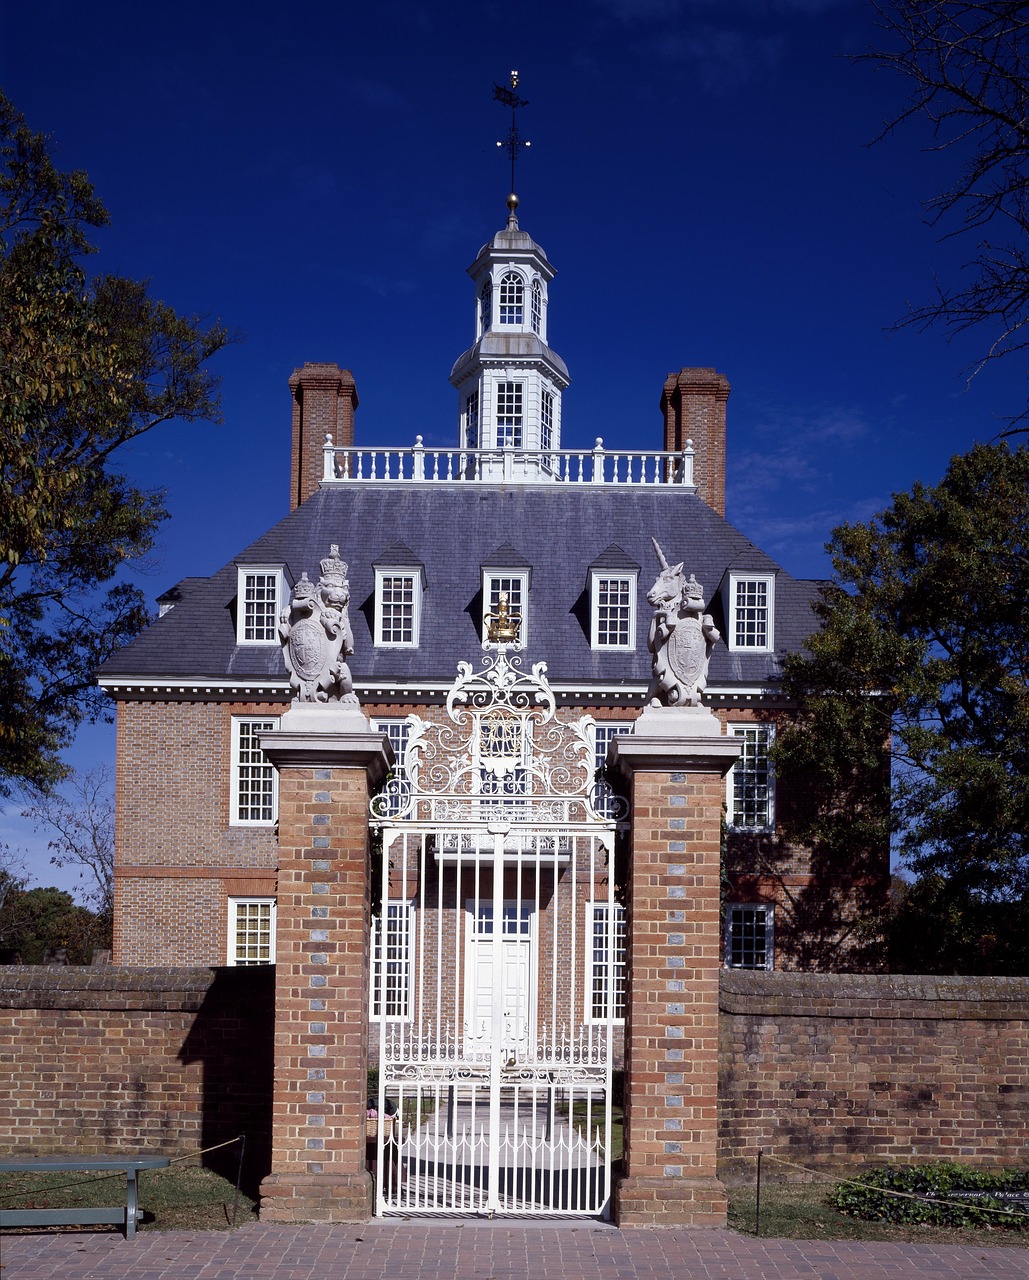 The Governor's Palace in Colonial Williamsburg.